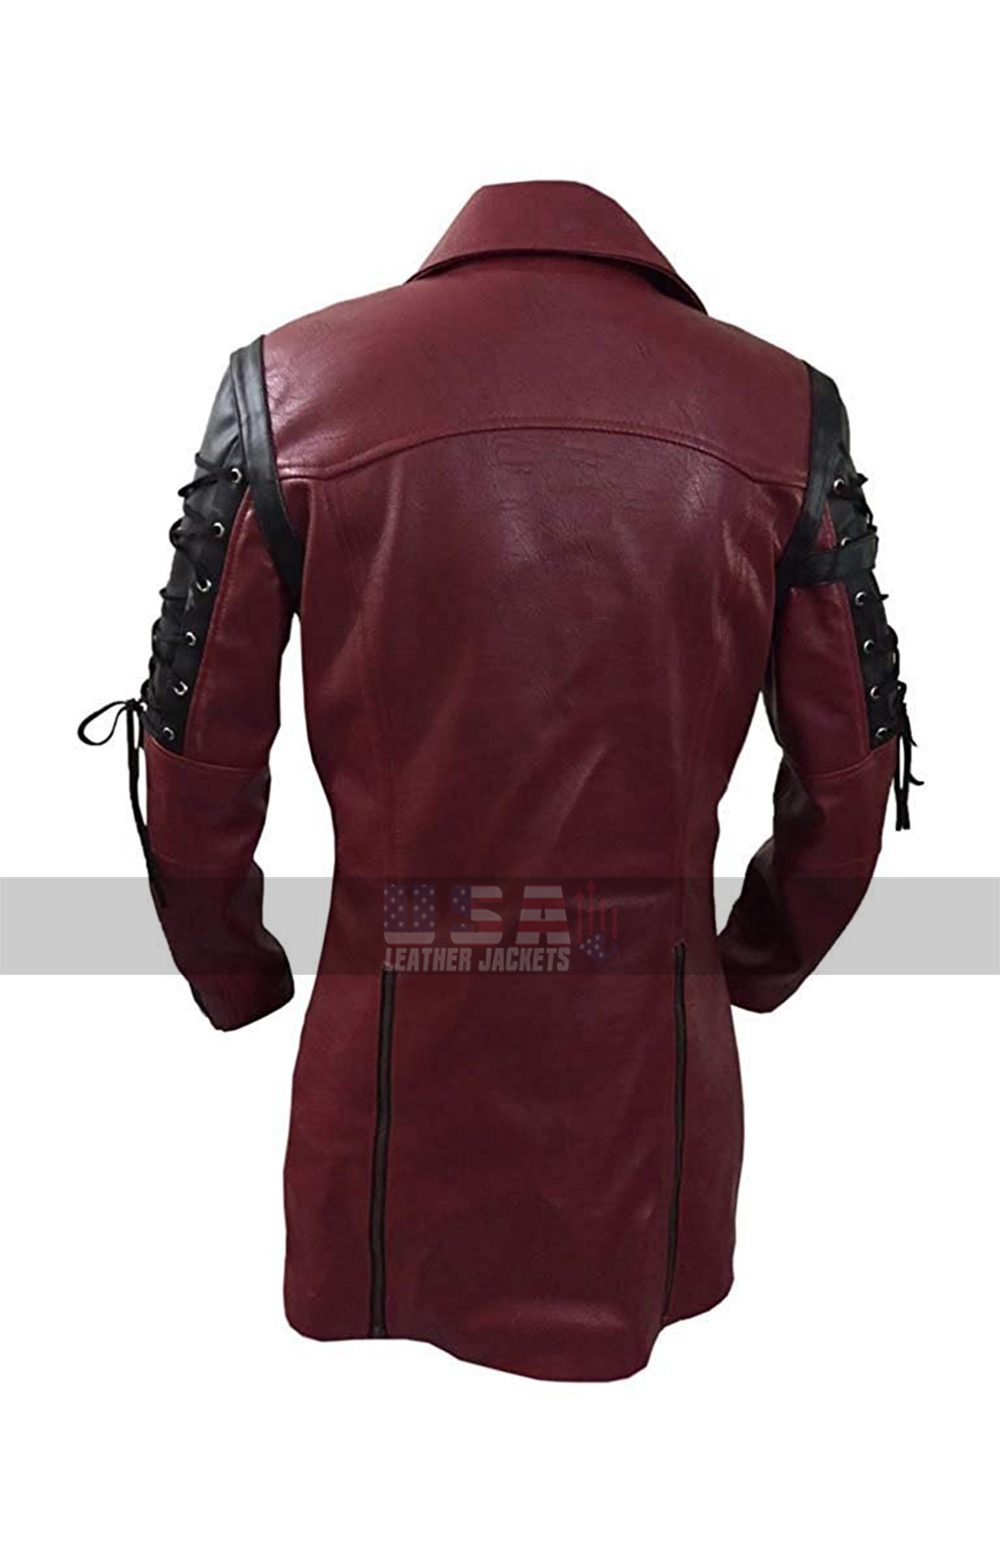 Gothic Steampunk Matrix Black And Maroon Leather Trench Coat